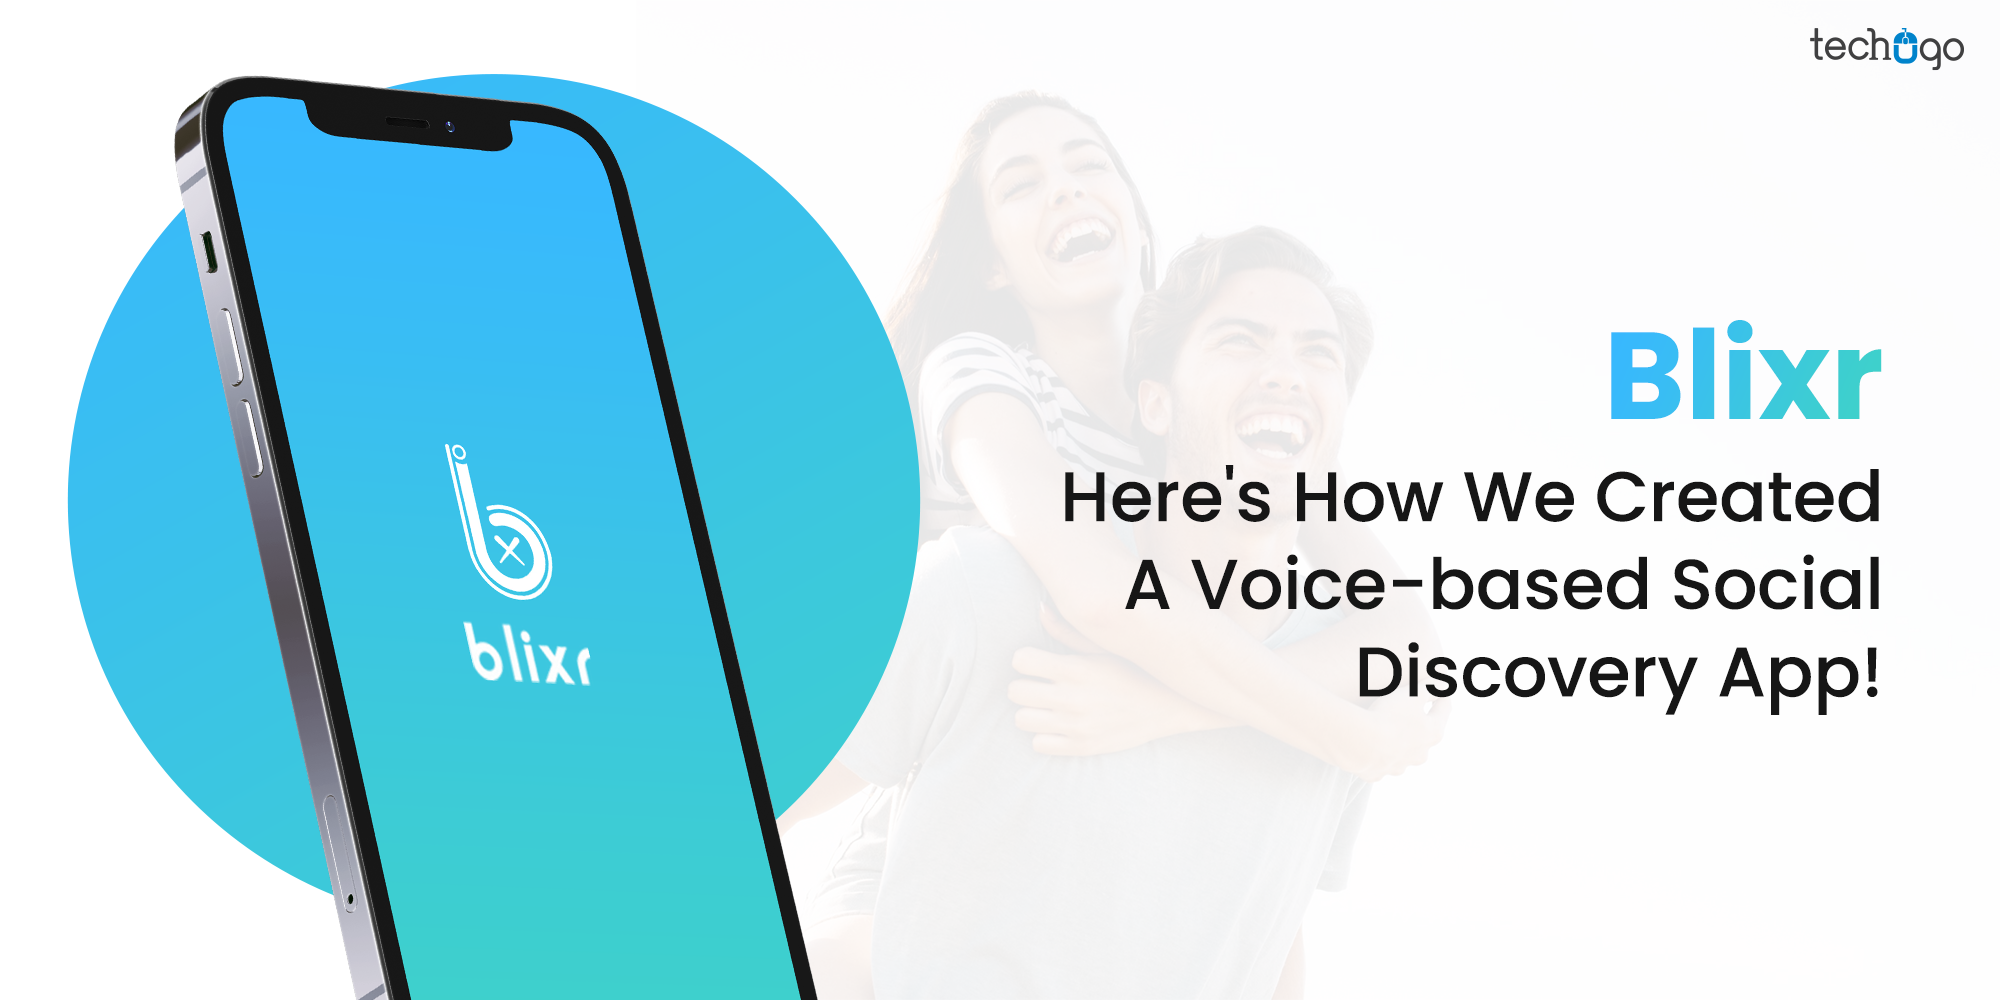 Blixr- Here’s How We Created A Voice-based Social Discovery App!